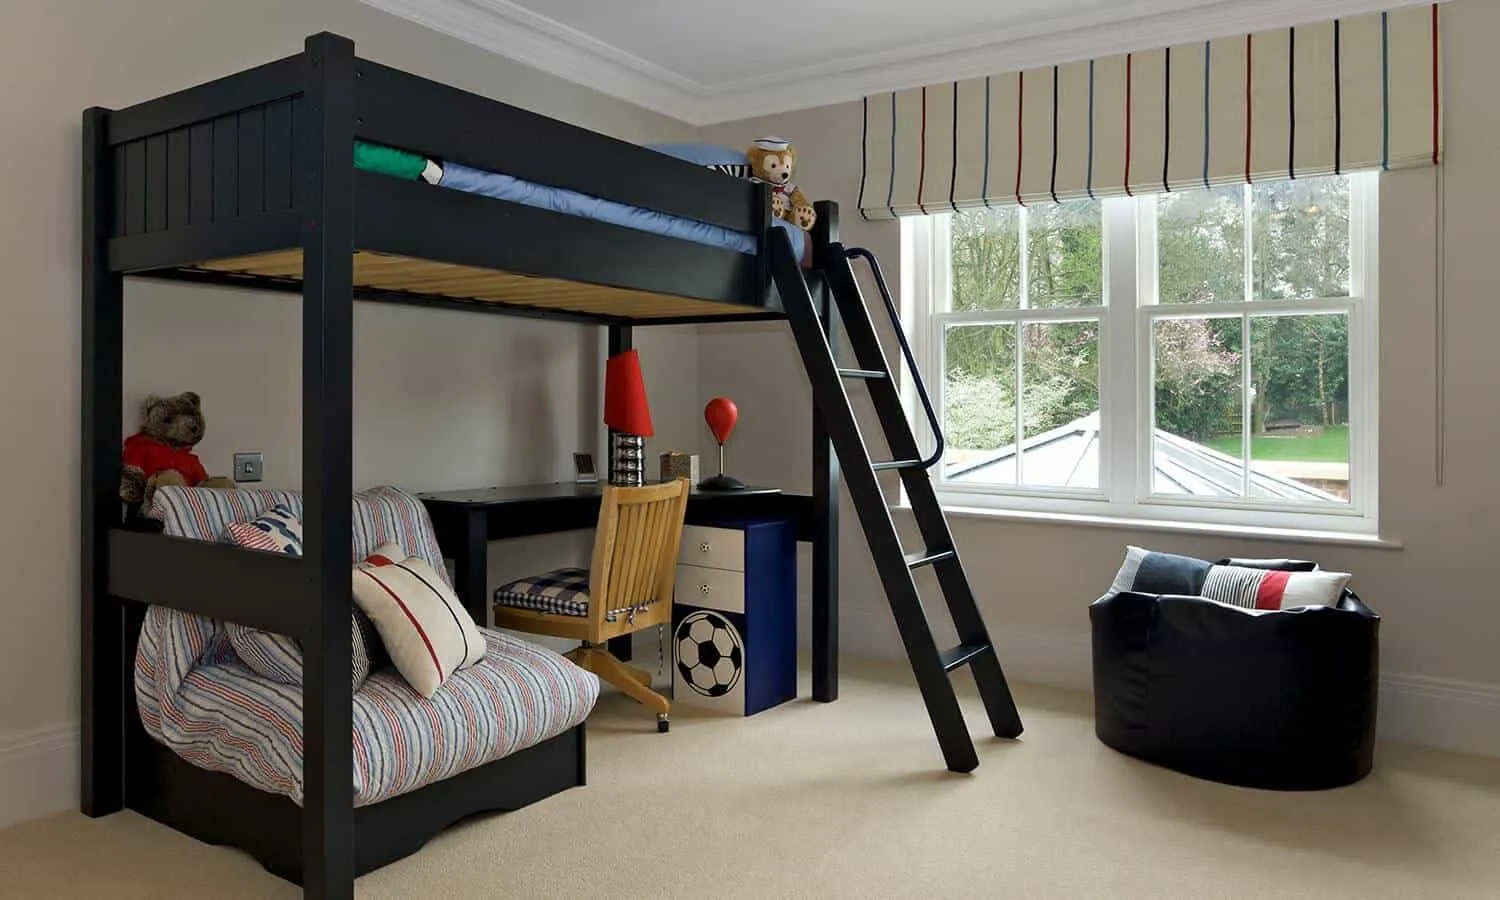  bunk beds for kids, space saving beds like futon